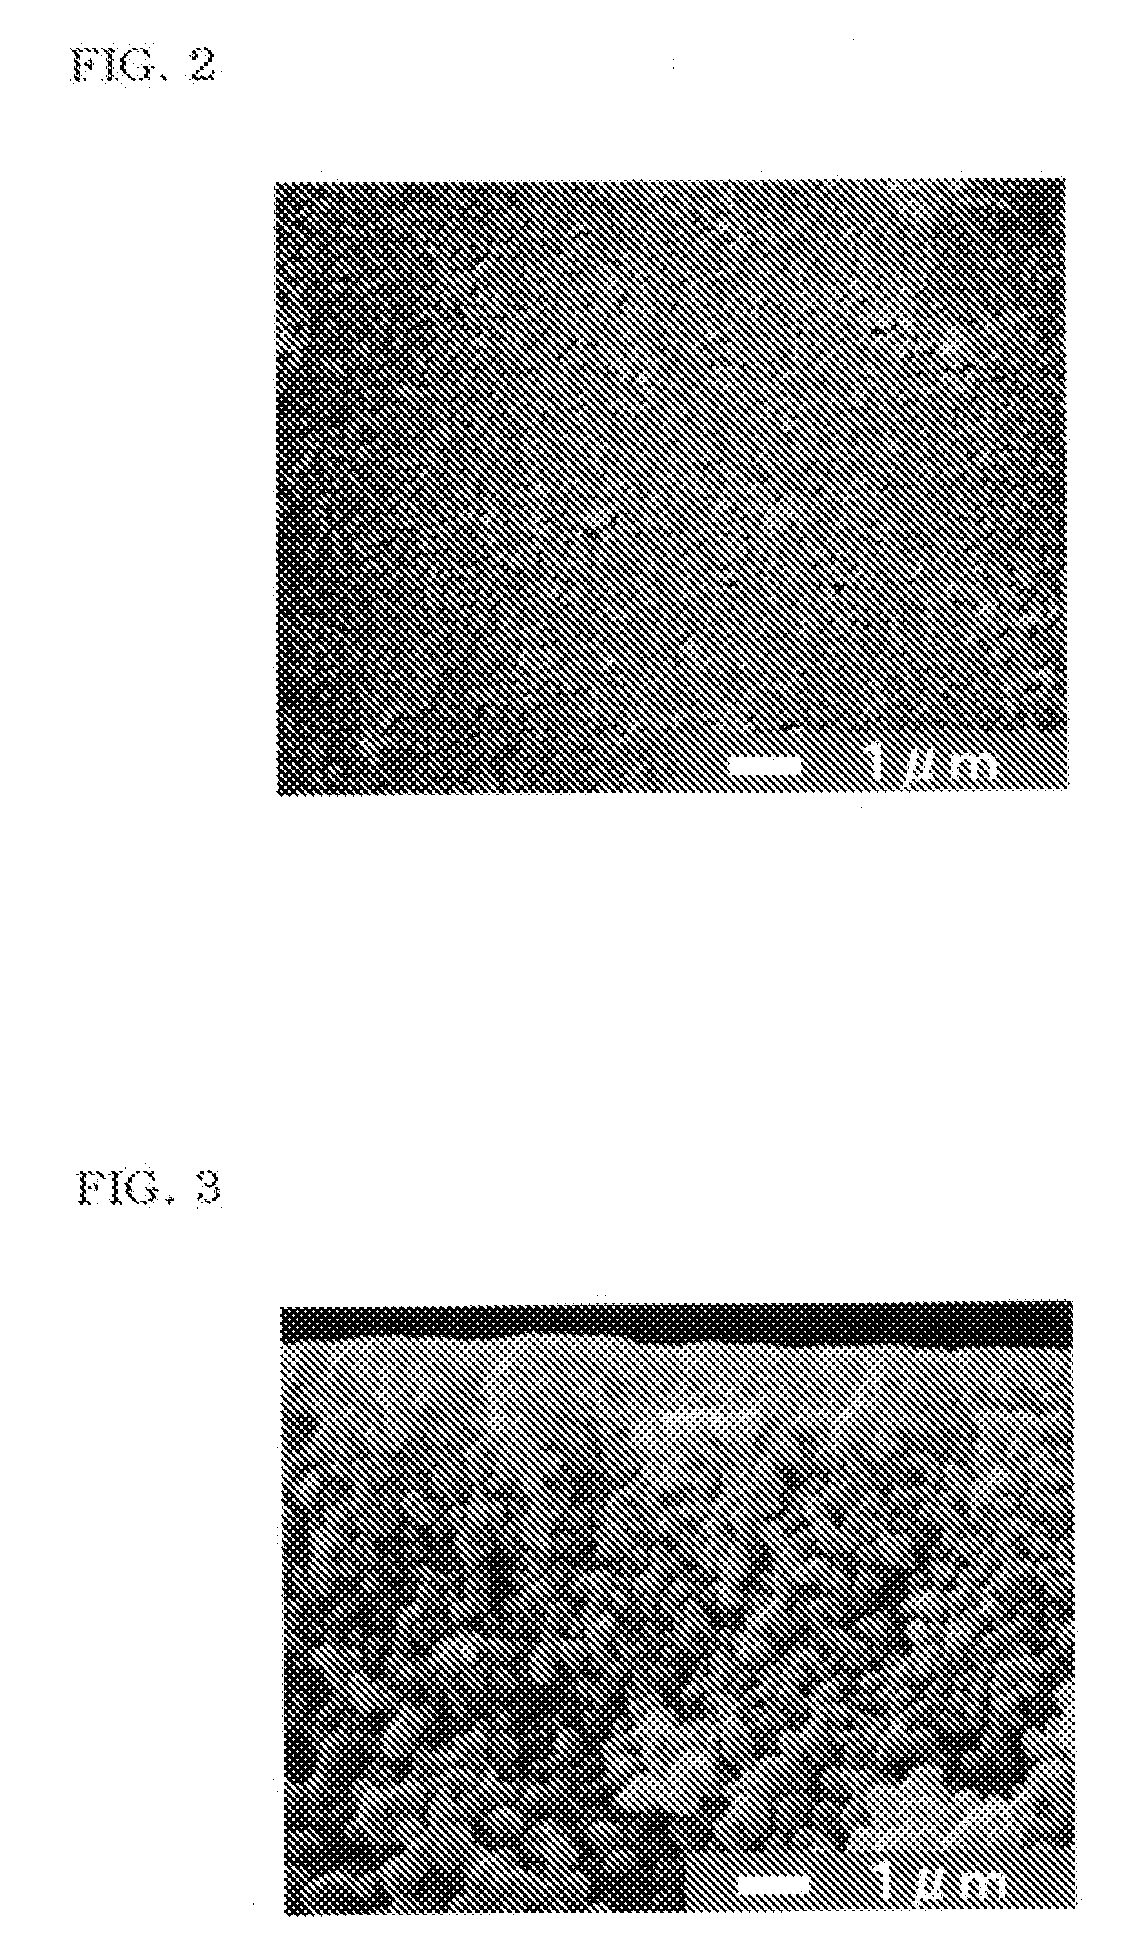 Porous structure with seed crystal-containing layer for manufacturing zeolite membrane, zeolite membrane, and method for manufacturing zeolite membrane